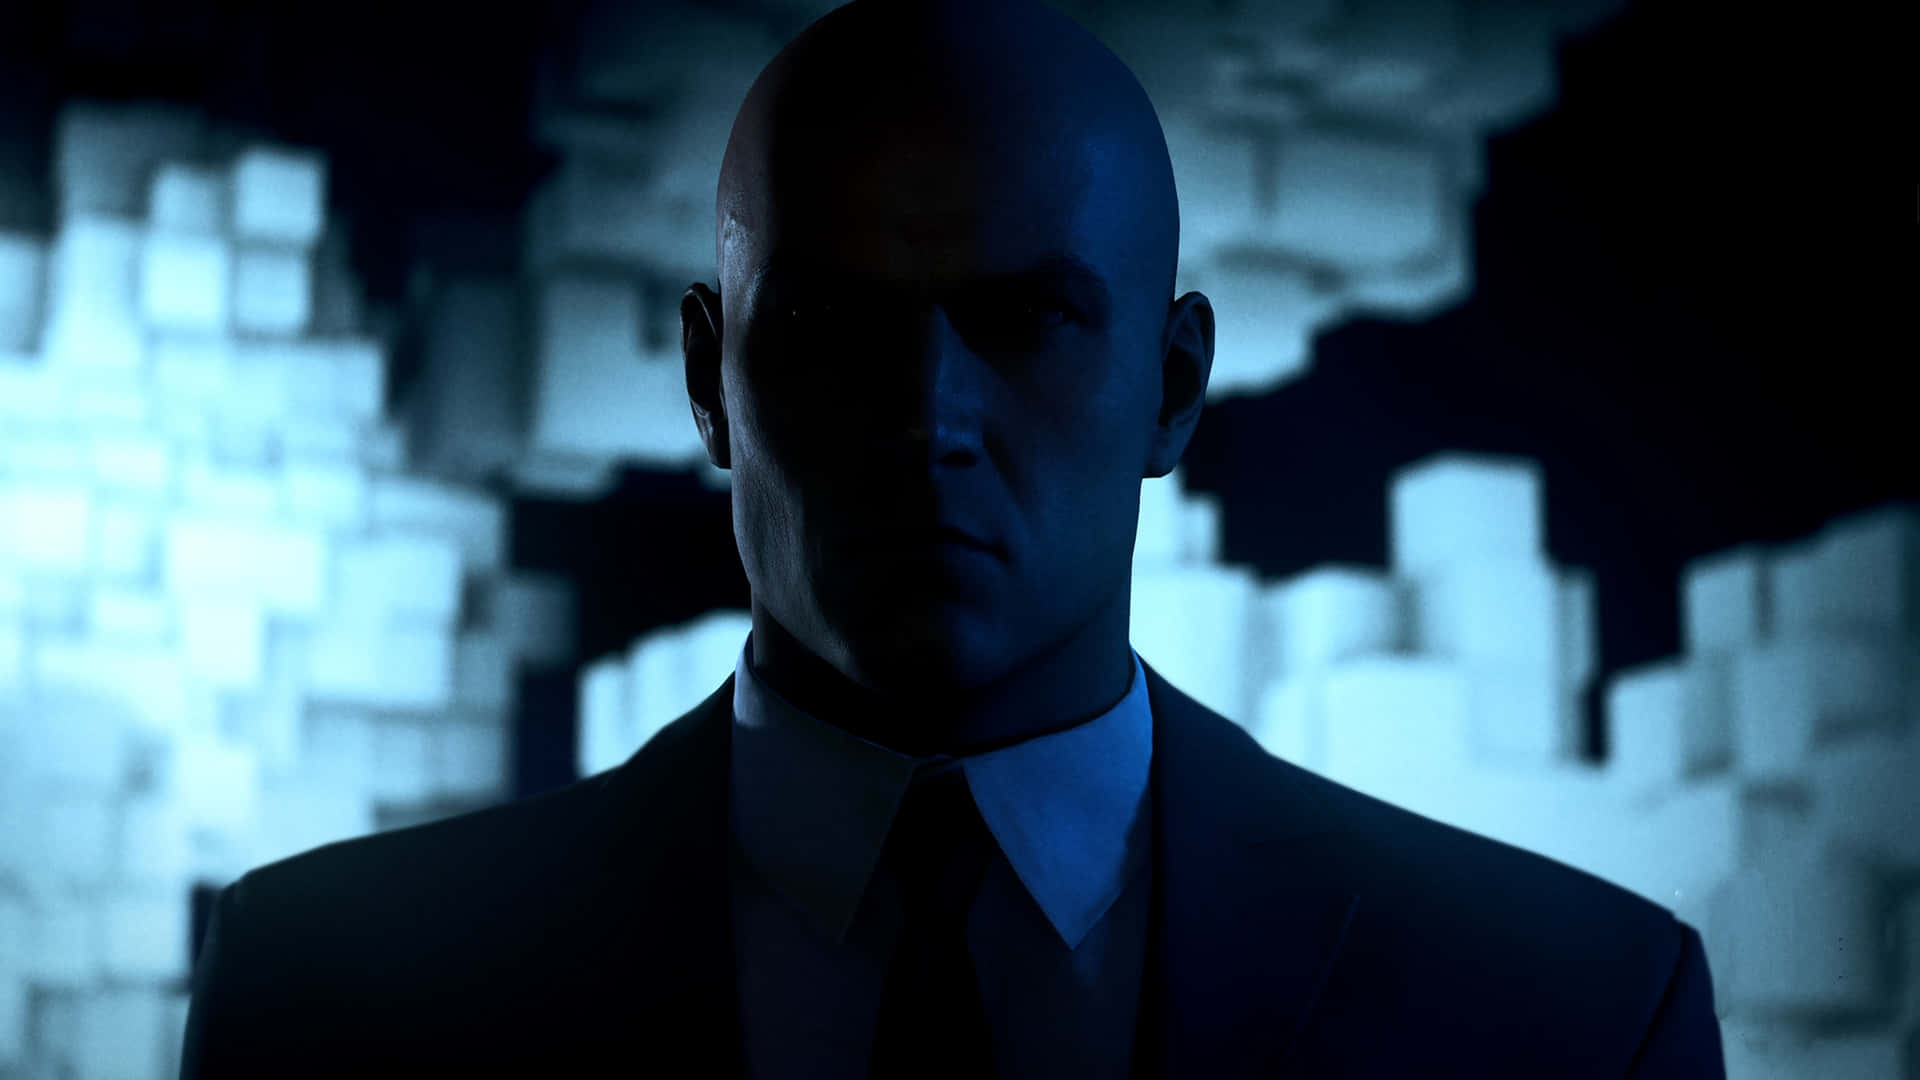 Agent 47 Hitman 3 Promotional Poster Background